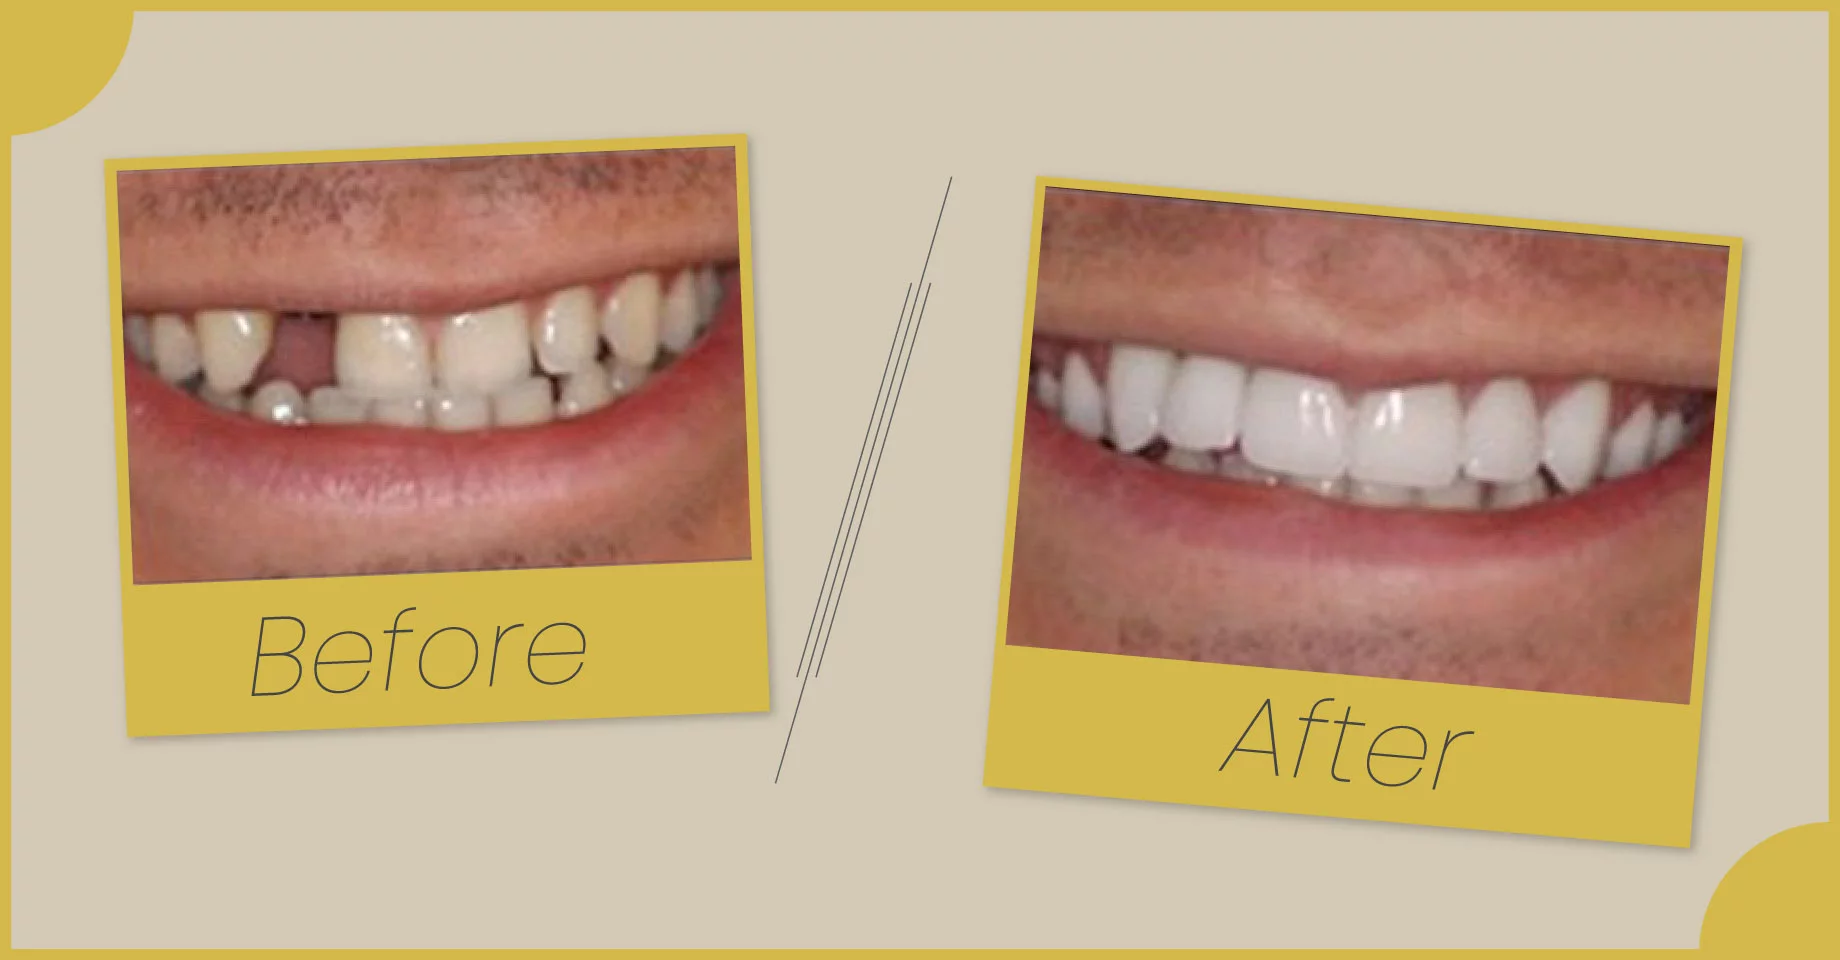 Before and after Comparison of Dental Treatment Results.